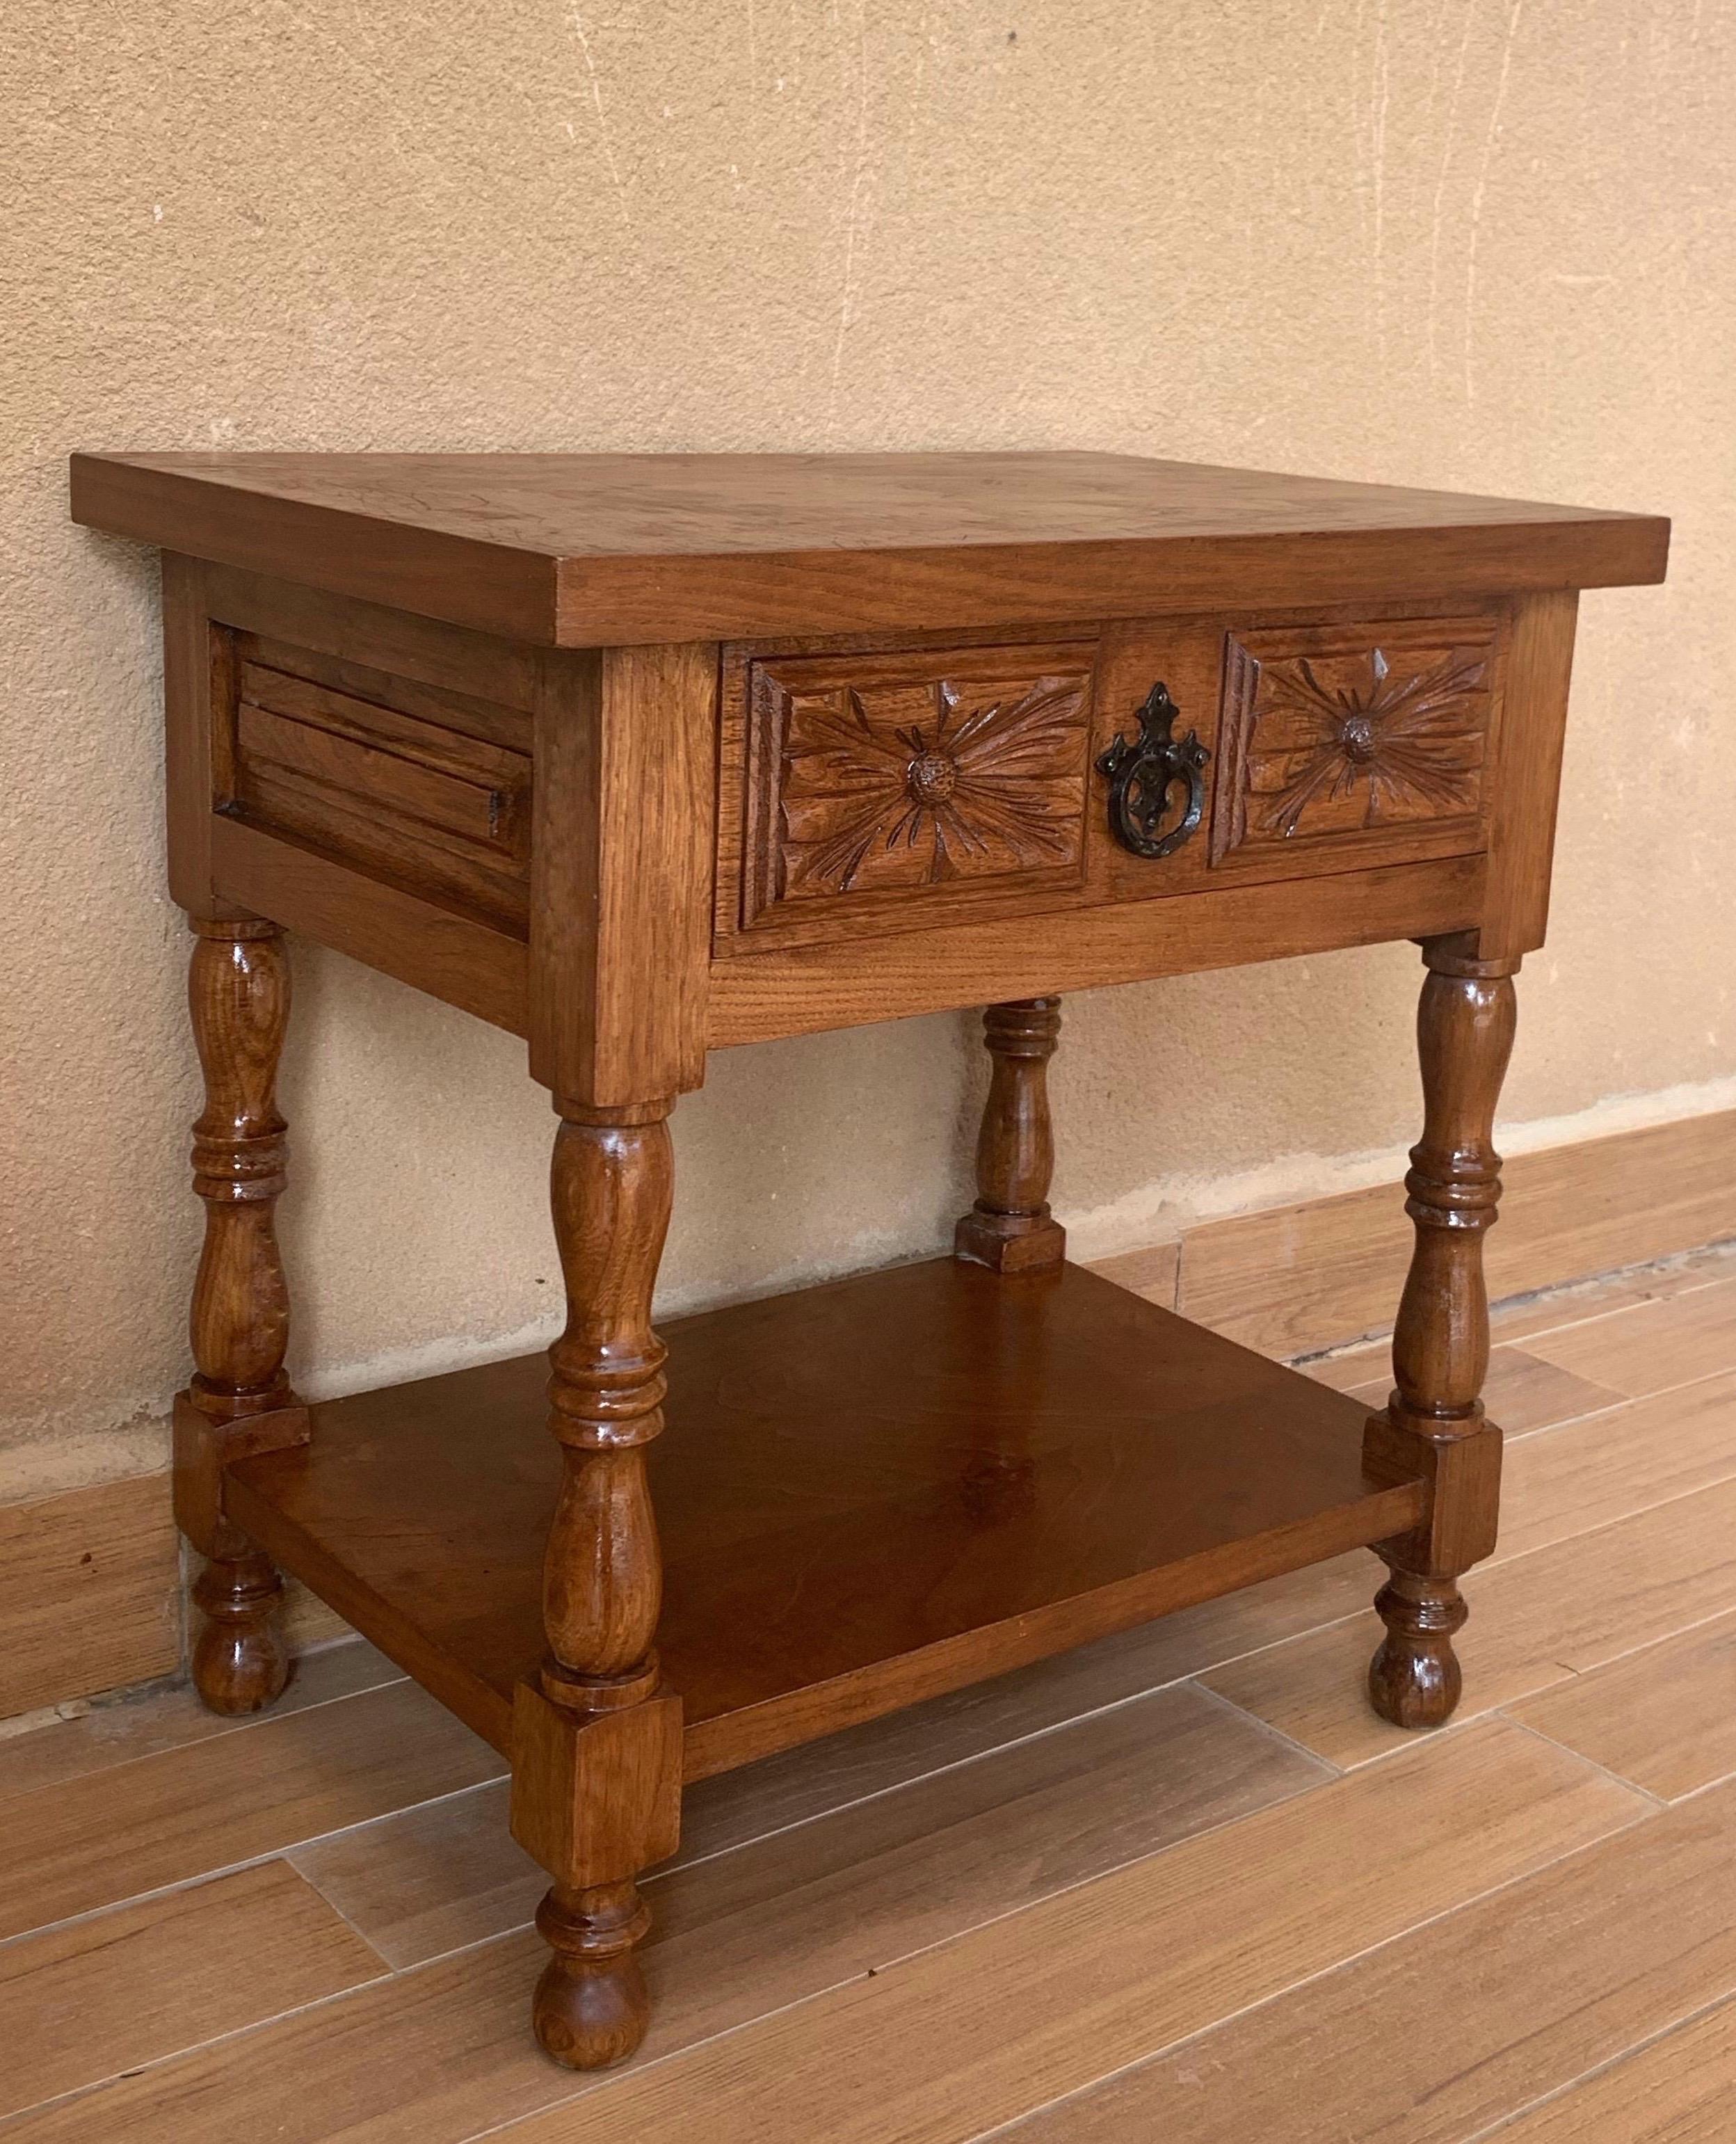 20th century pair of Catalan, Spanish nightstands with carved bars in both sides, one drawer and open shelf
The tables are made of a native pine of this region named 